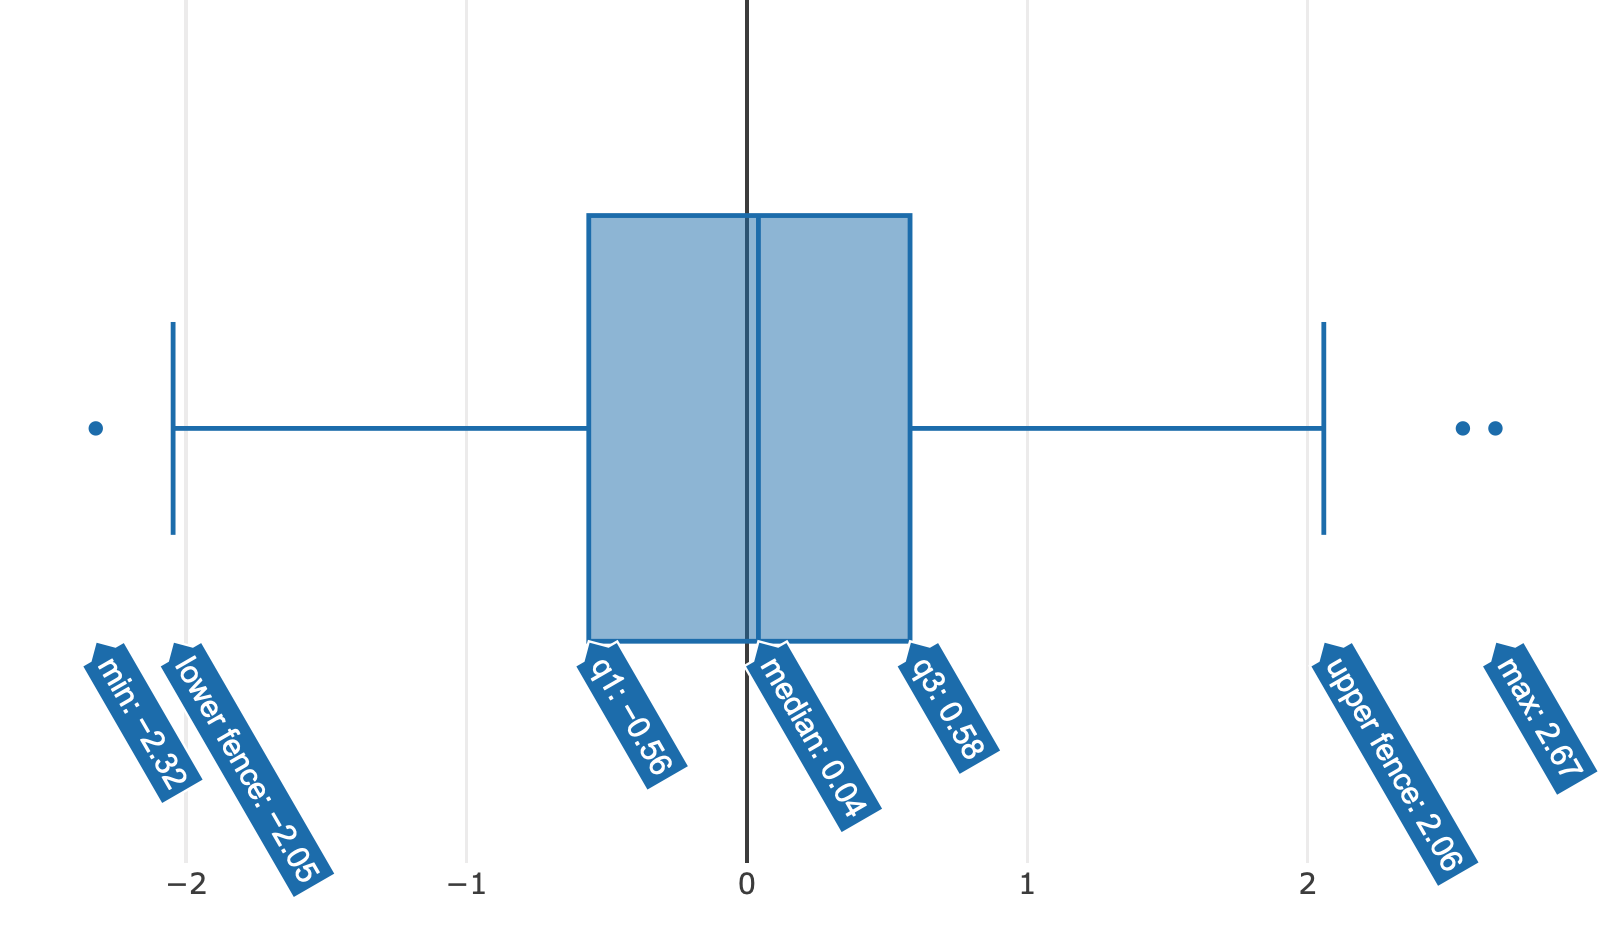 Using xaxis.hoverformat to round aggregated values displayed in the tooltip to two decimal places.